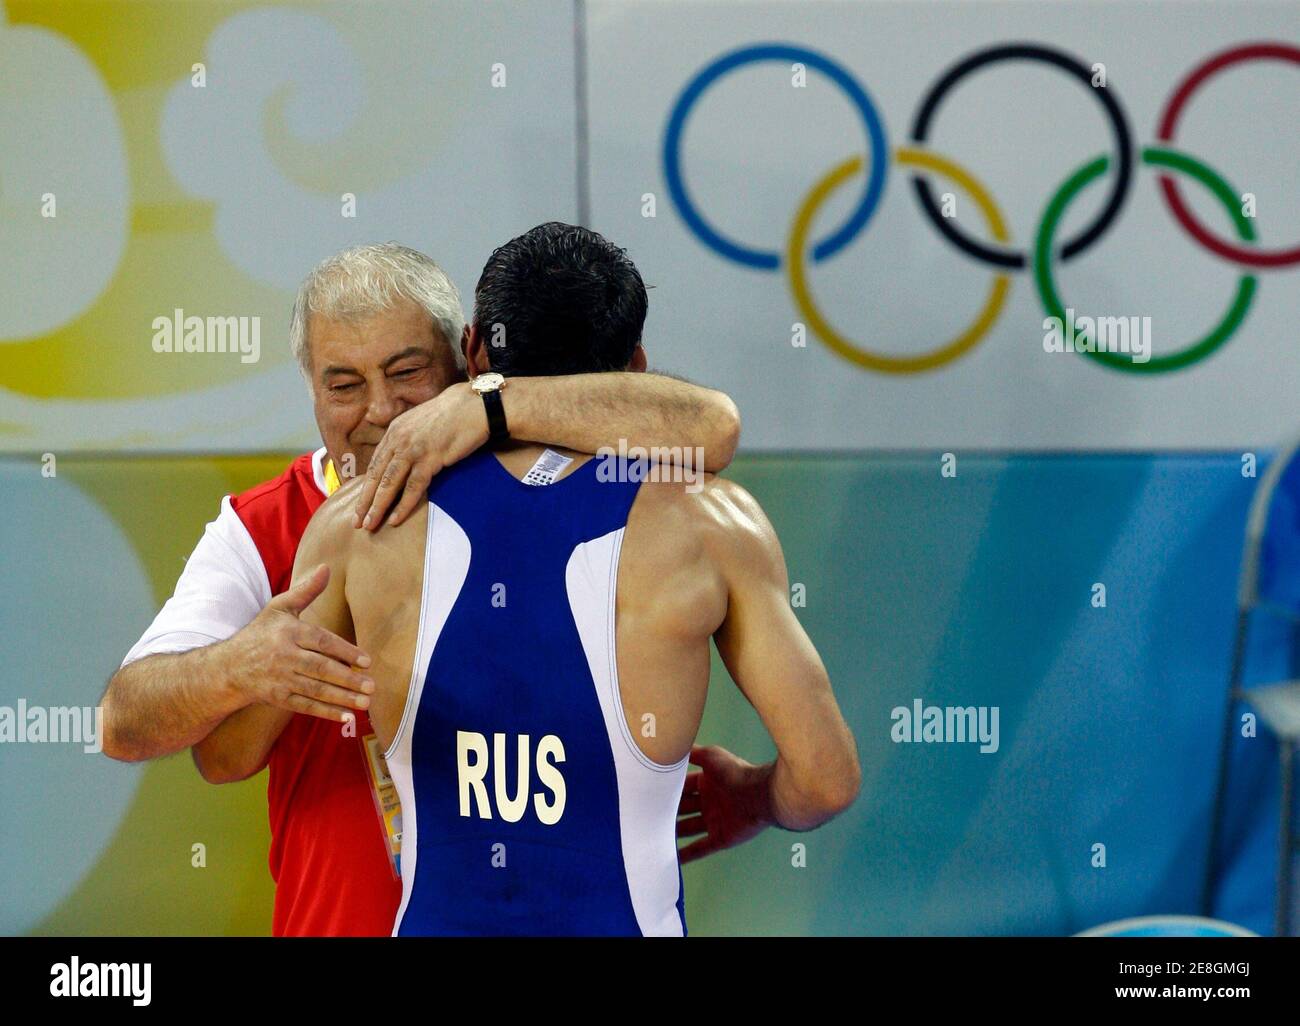 Buvaysa Saytiev of Russia is hugged by his coach after defeating Soslan Tigiev of Uzbekistan in their 74kg men's freestyle wrestling final match at the Beijing 2008 Olympic Games August 20, 2008.     REUTERS/Oleg Popov (CHINA) Stock Photo